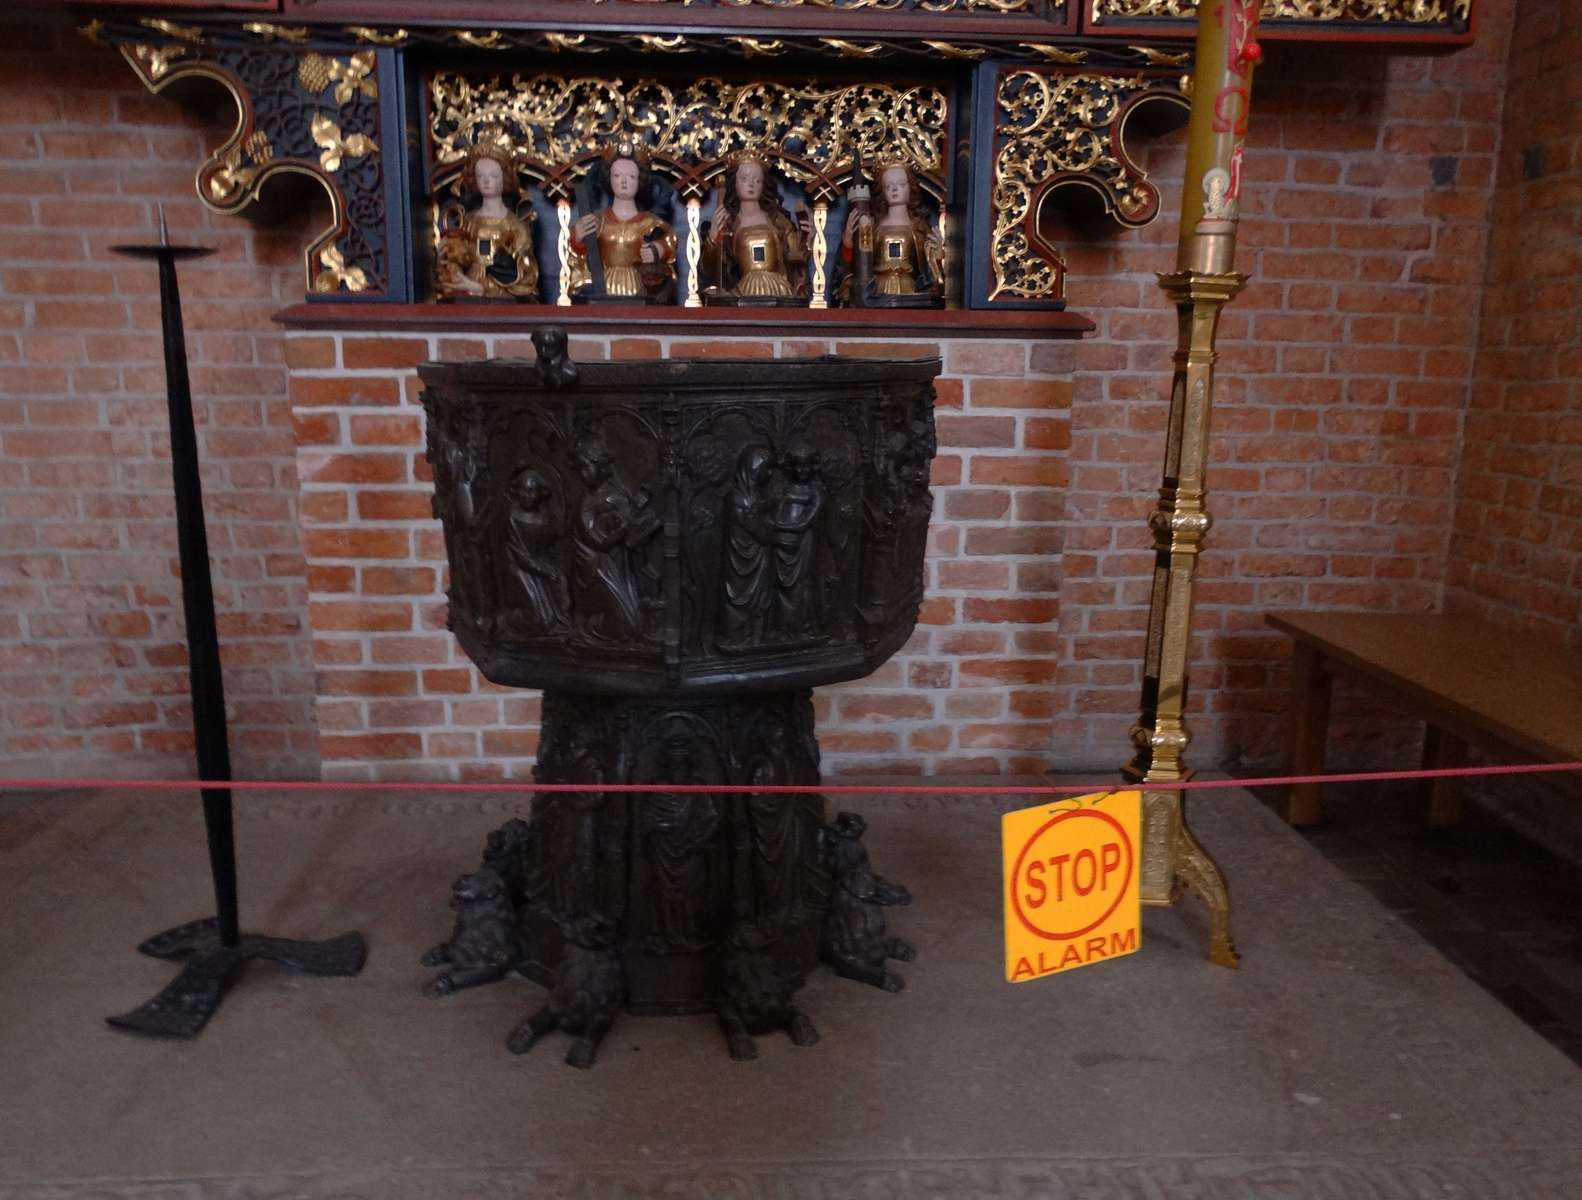 The baptismal font from the church of Saint Nicholas in Elbląg puzzle online from photo